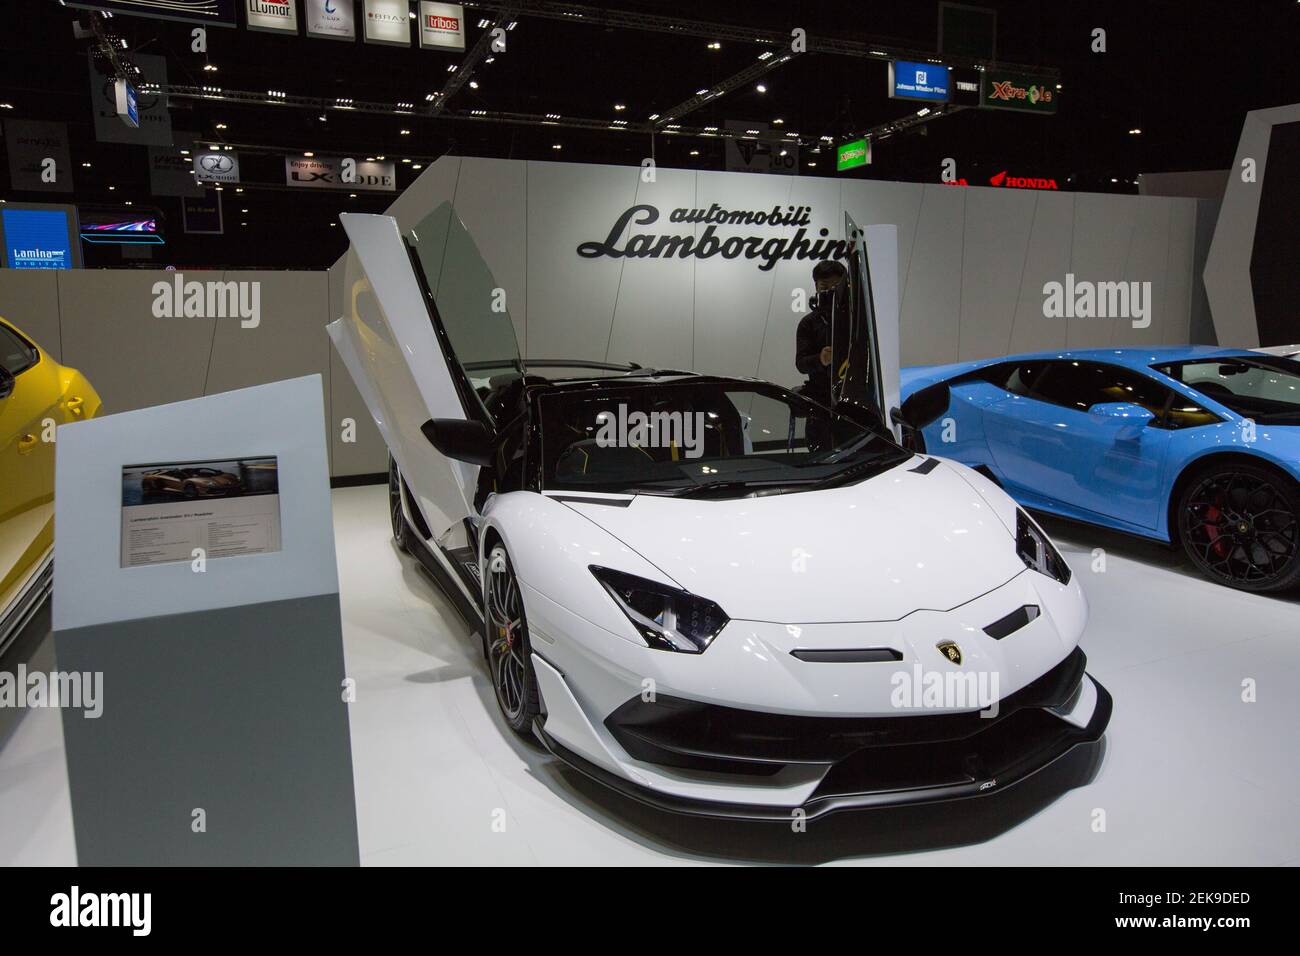 A Lamborghini Aventador SVJ Roadster car seen at the Lamborghini stand  during the 41st Bangkok International Motor Show 2020. The exhibition  started today on July 15th and will run until July 26th.